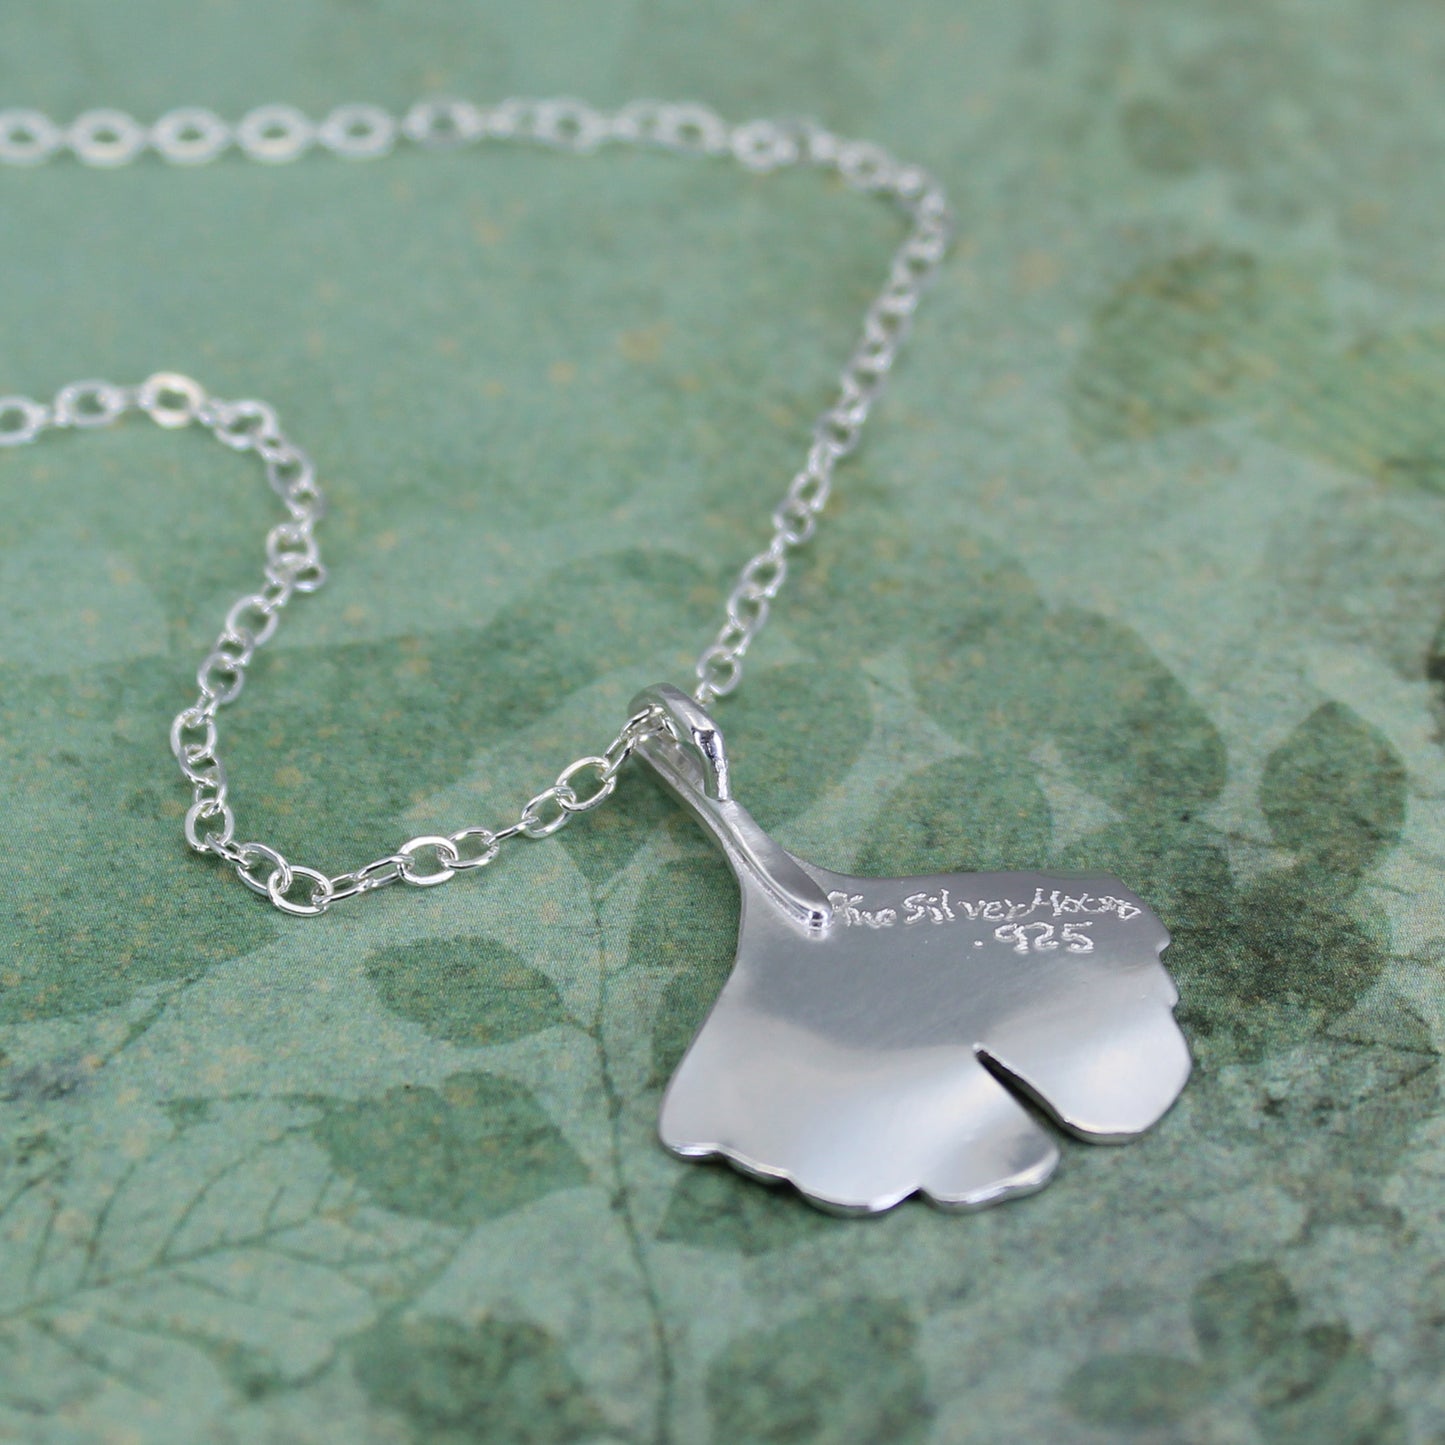 Small ginkgo leaf necklace in sterling silver